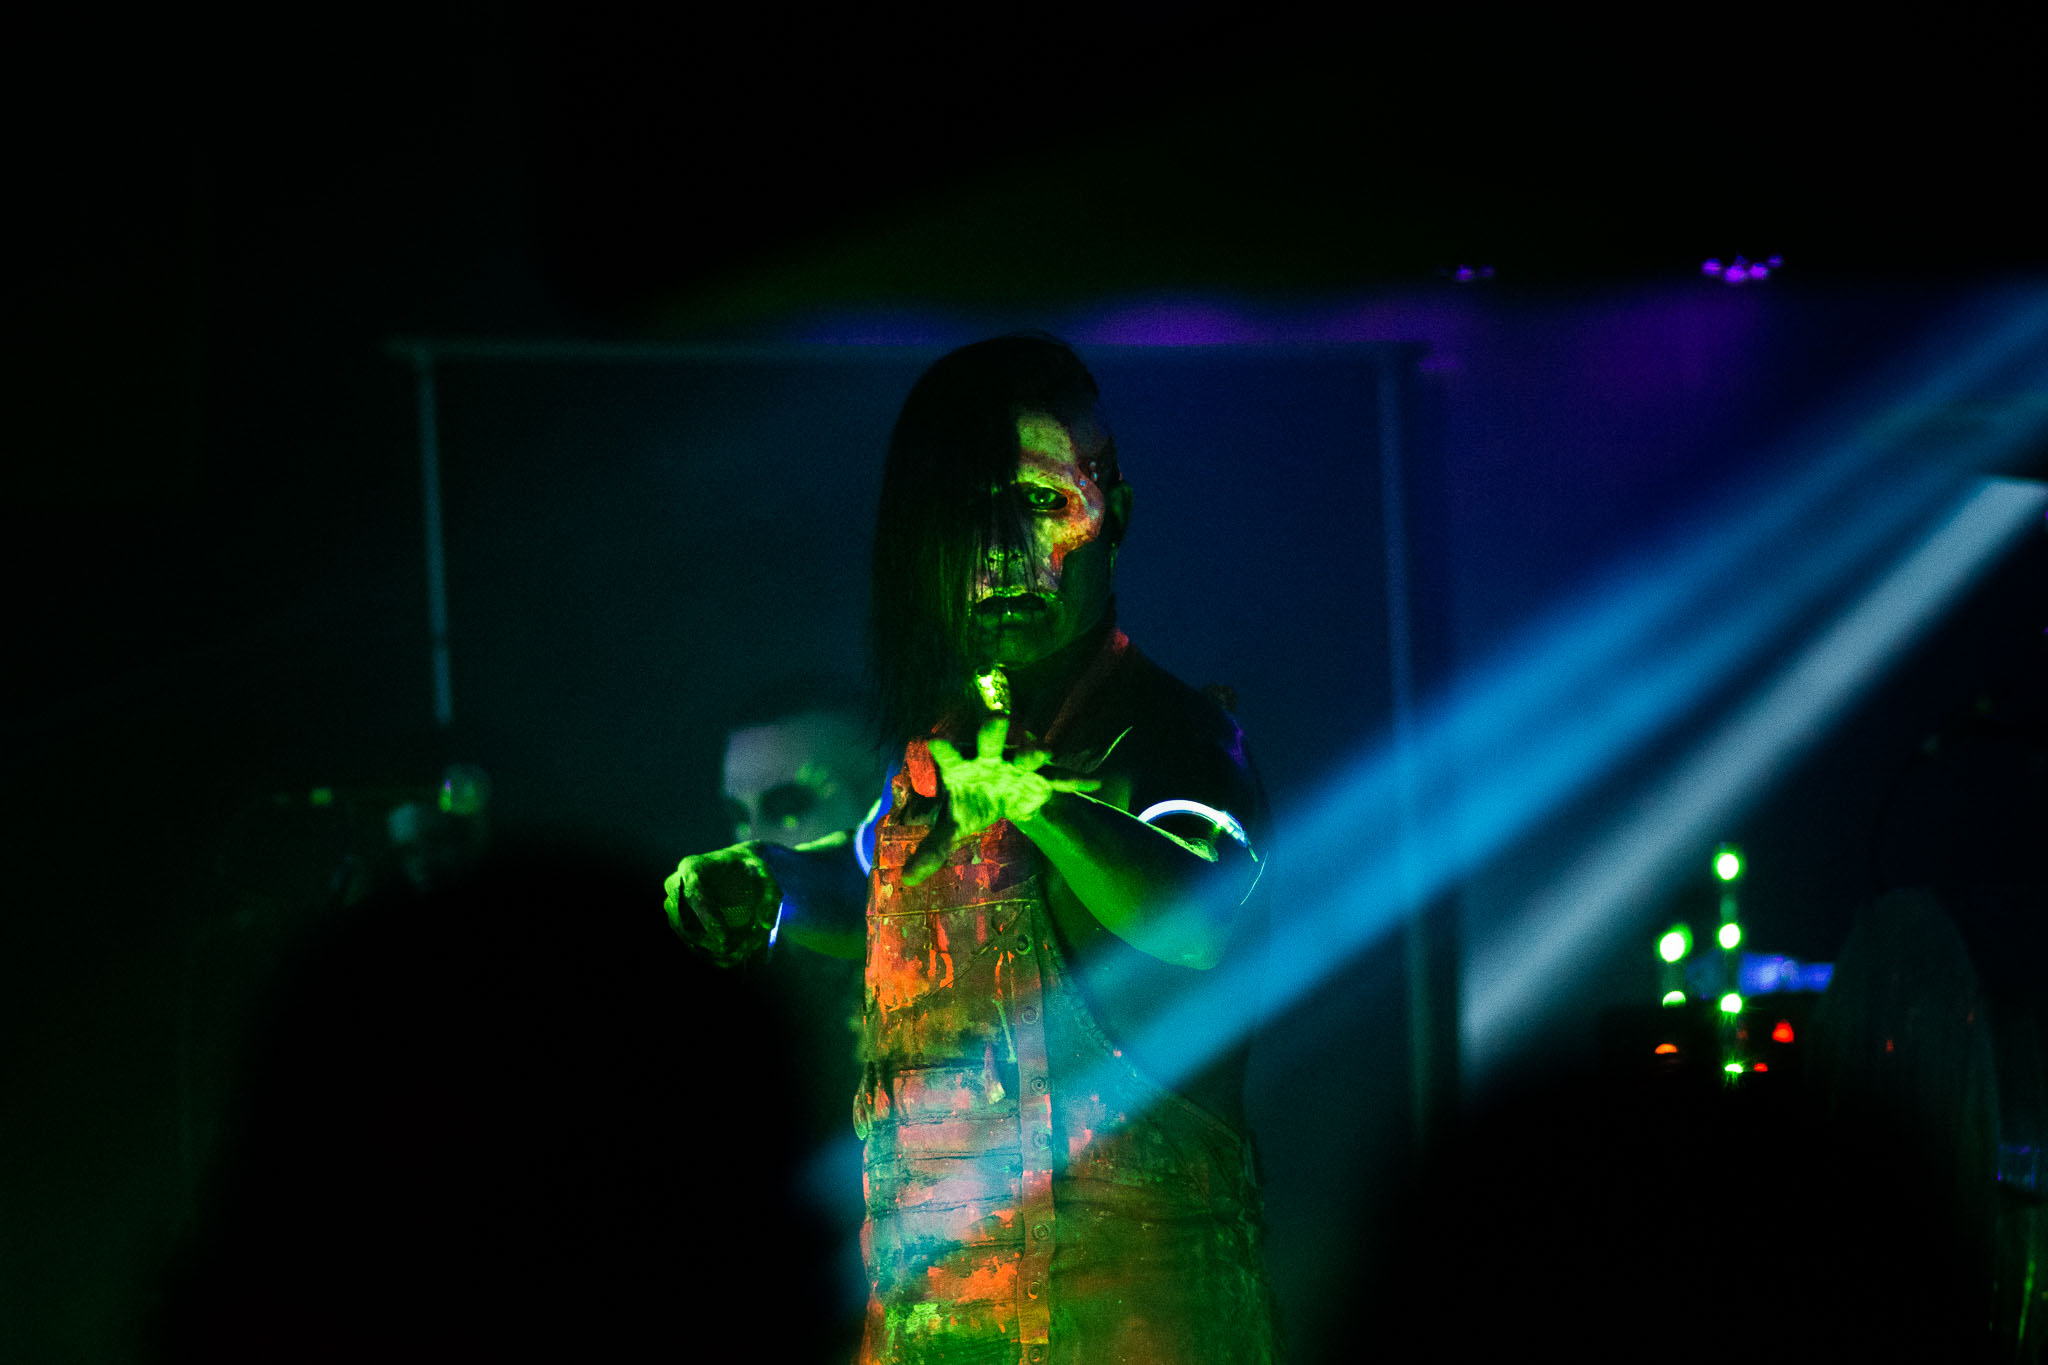 Wednesday 13 on stage at The Machine Shop